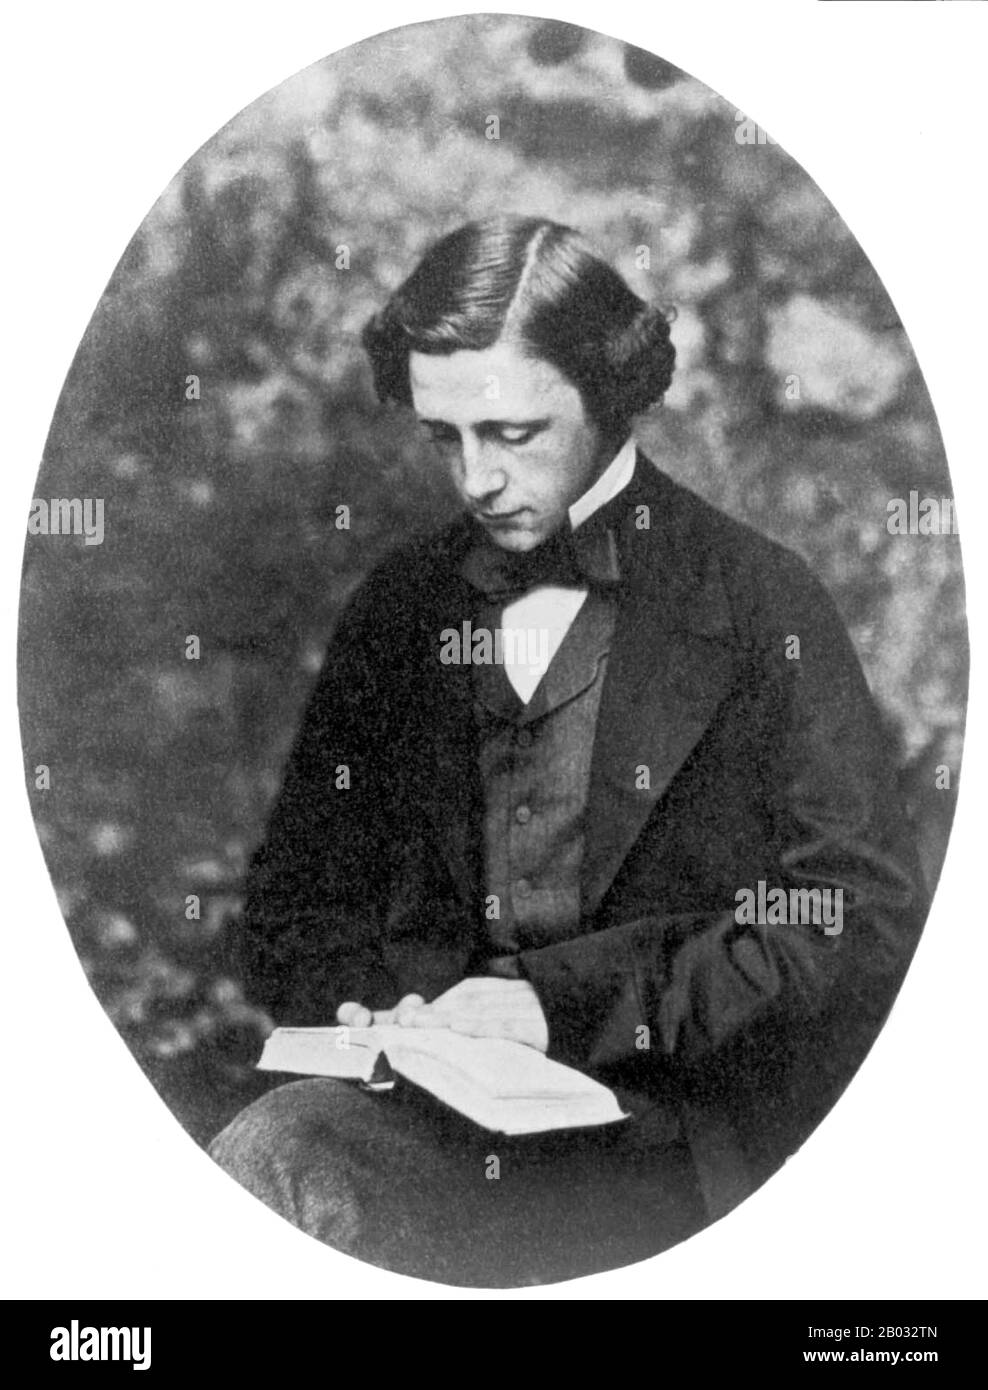 Charles Lutwidge Dodgson (27 January 1832 – 14 January 1898), better known by his pen name Lewis Carroll, was an English writer, mathematician, logician, Anglican deacon, and photographer.  His most famous writings are Alice's Adventures in Wonderland, its sequel Through the Looking-Glass, which includes the poem Jabberwocky, and the poem The Hunting of the Snark, all examples of the genre of literary nonsense. He is noted for his facility at word play, logic, and fantasy. There are societies in many parts of the world dedicated to the enjoyment and promotion of his works and the investigation Stock Photo